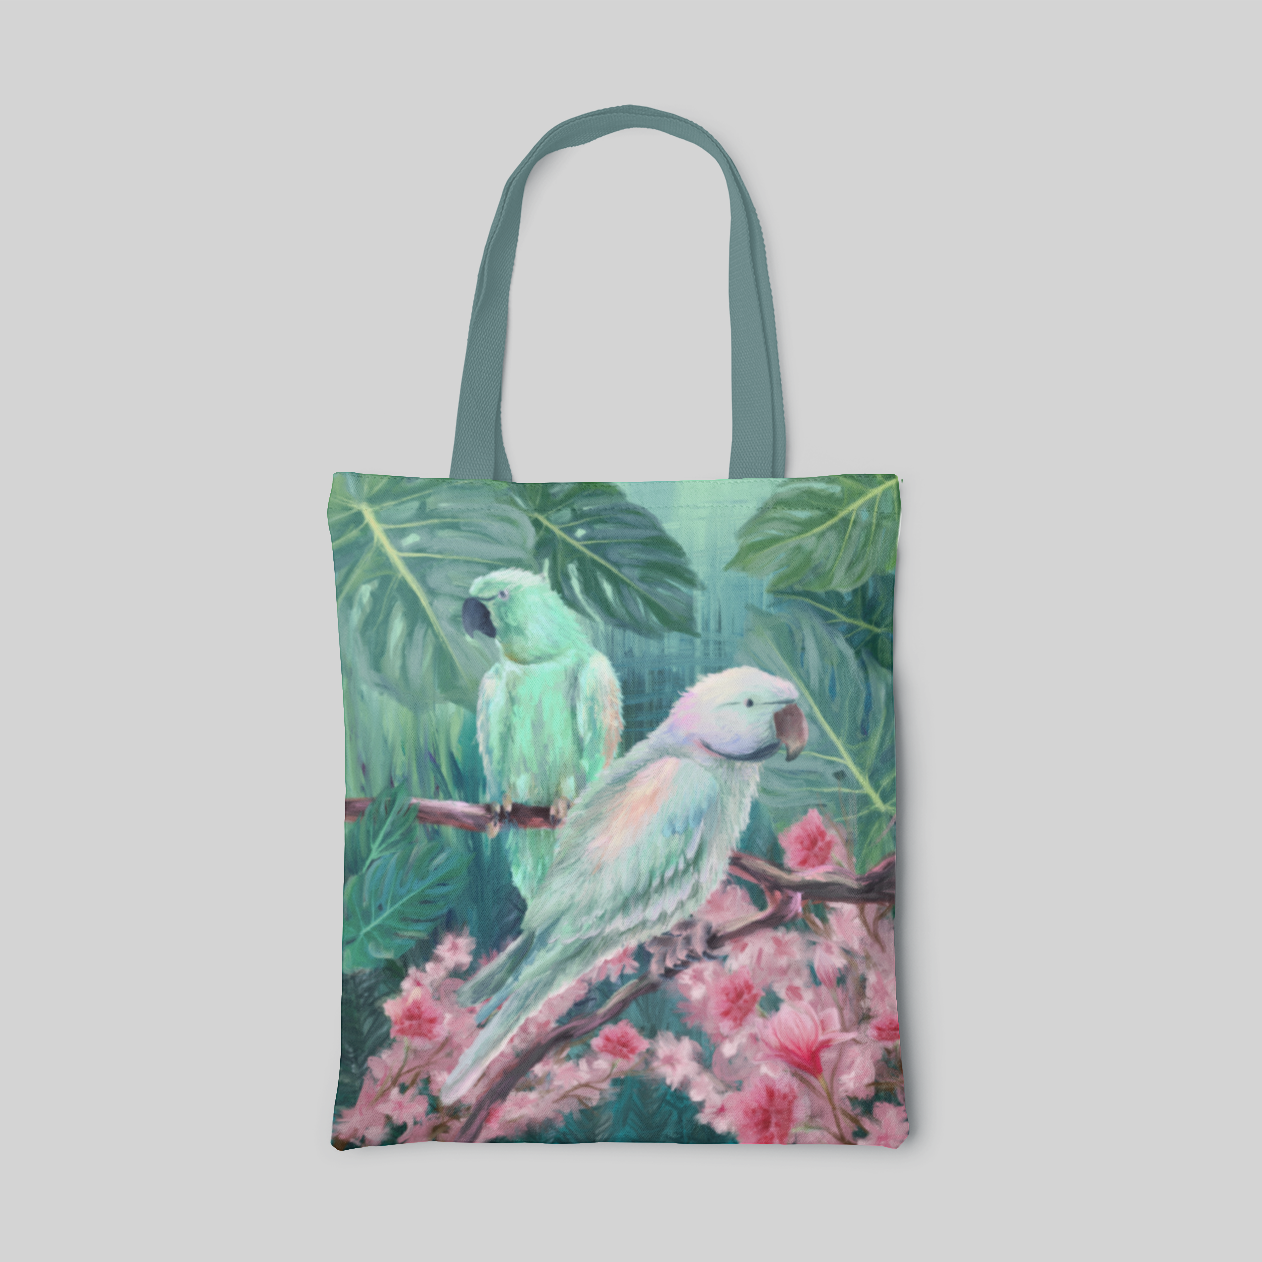 nature themed designed green tote bag with two parakeets on cherry blossom branches which surrounded by many green plants, front side